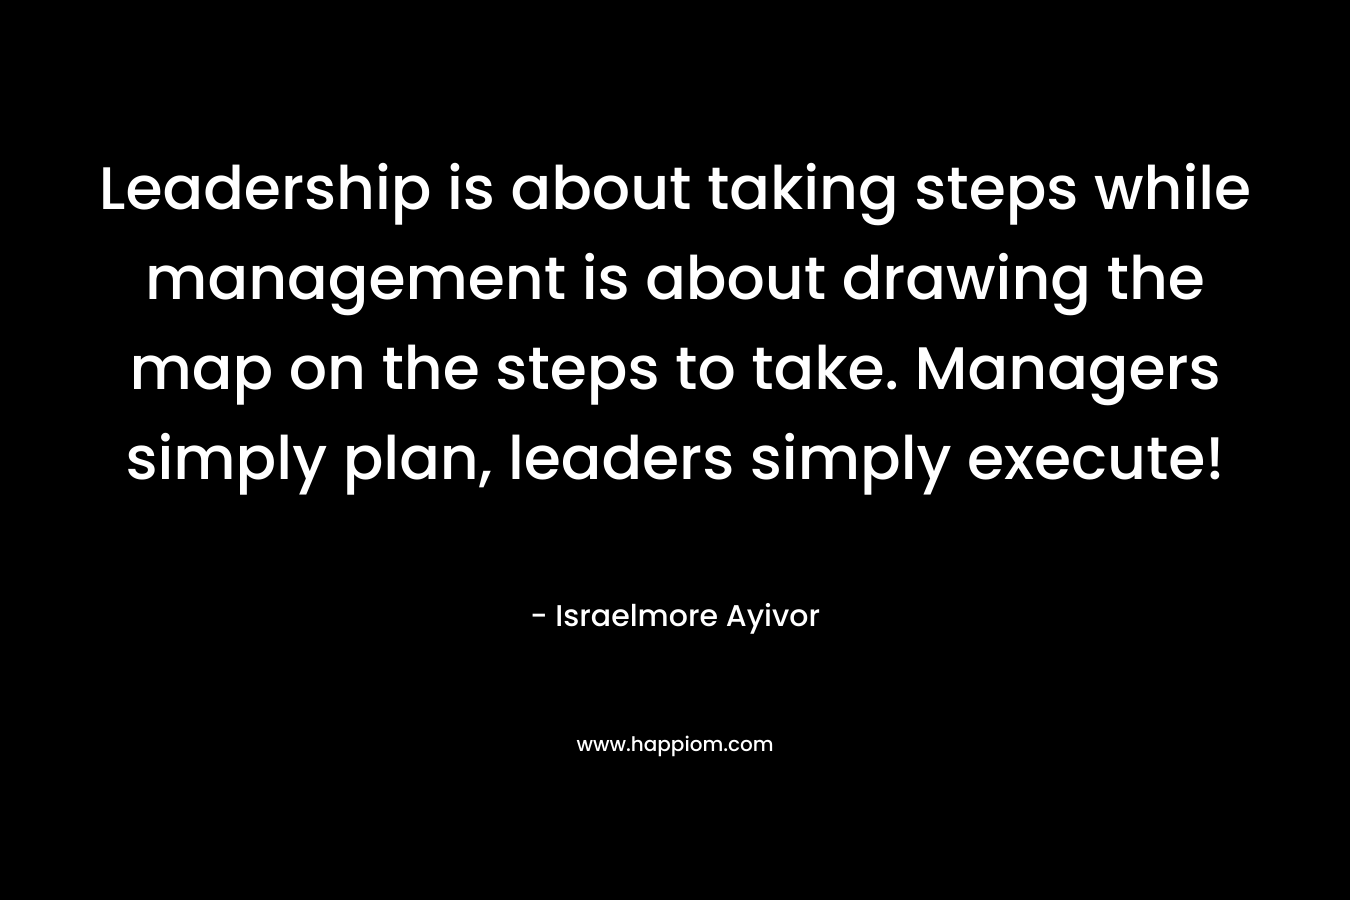 Leadership is about taking steps while management is about drawing the map on the steps to take. Managers simply plan, leaders simply execute!